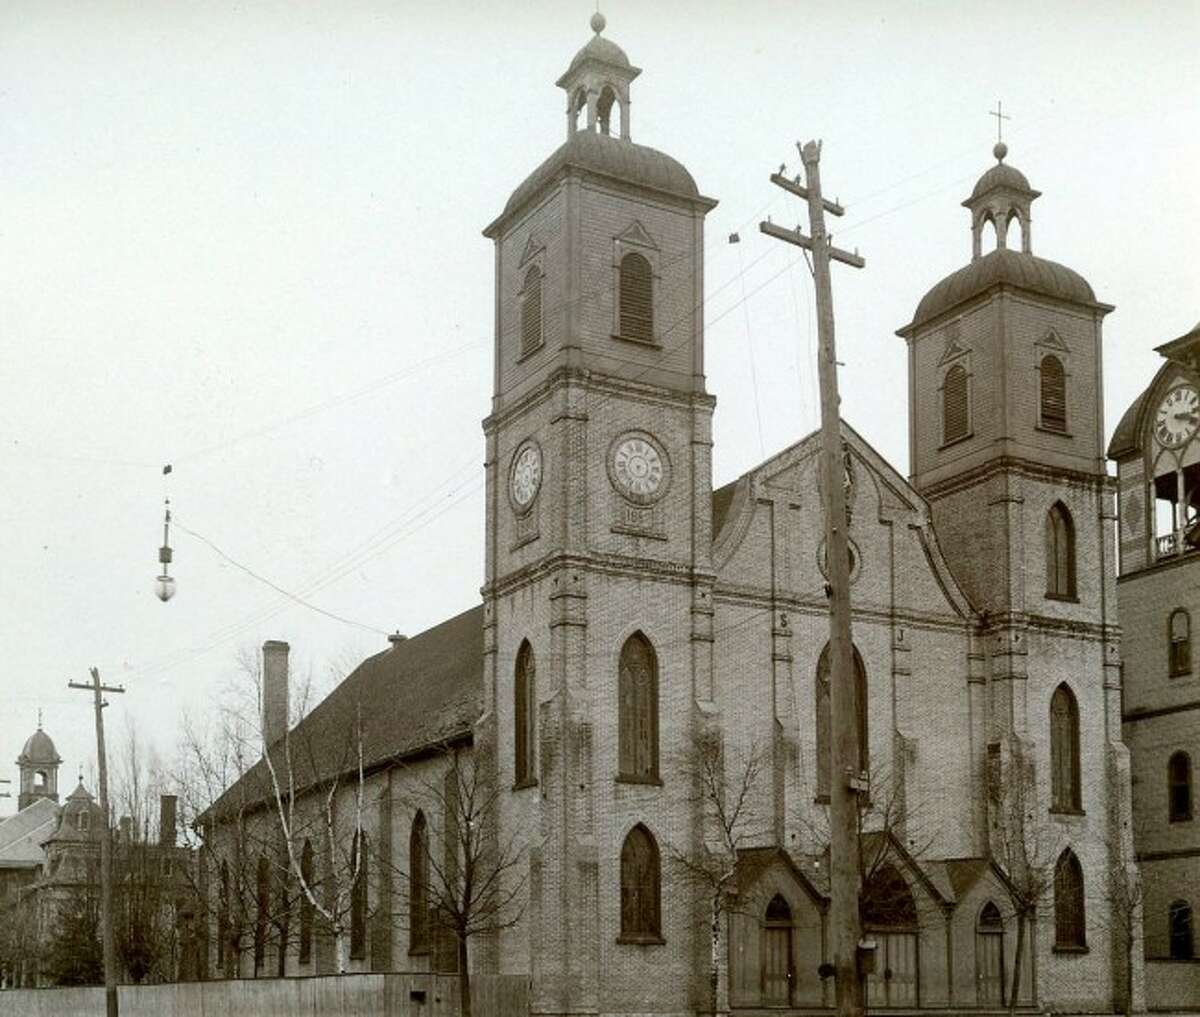 The St. Joseph Catholic Church is shown in this 1900 photograph.